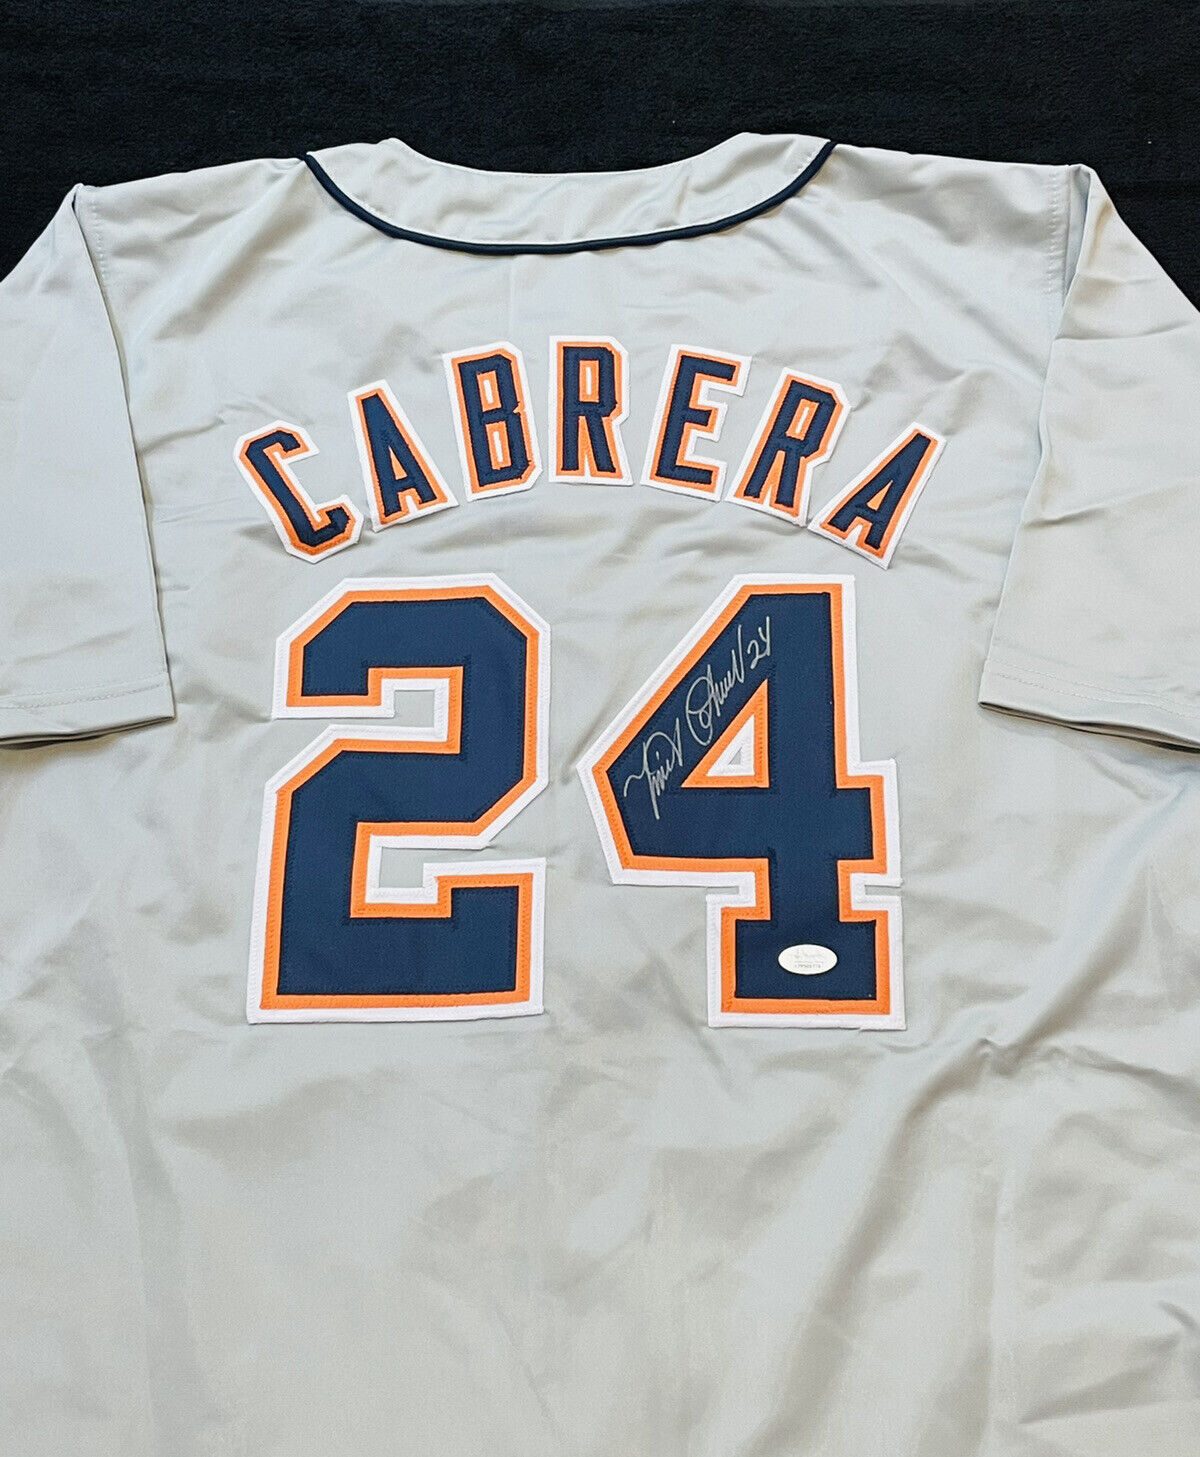 Miguel Cabrera Signed Detroit Tigers Baseball Jersey with COA